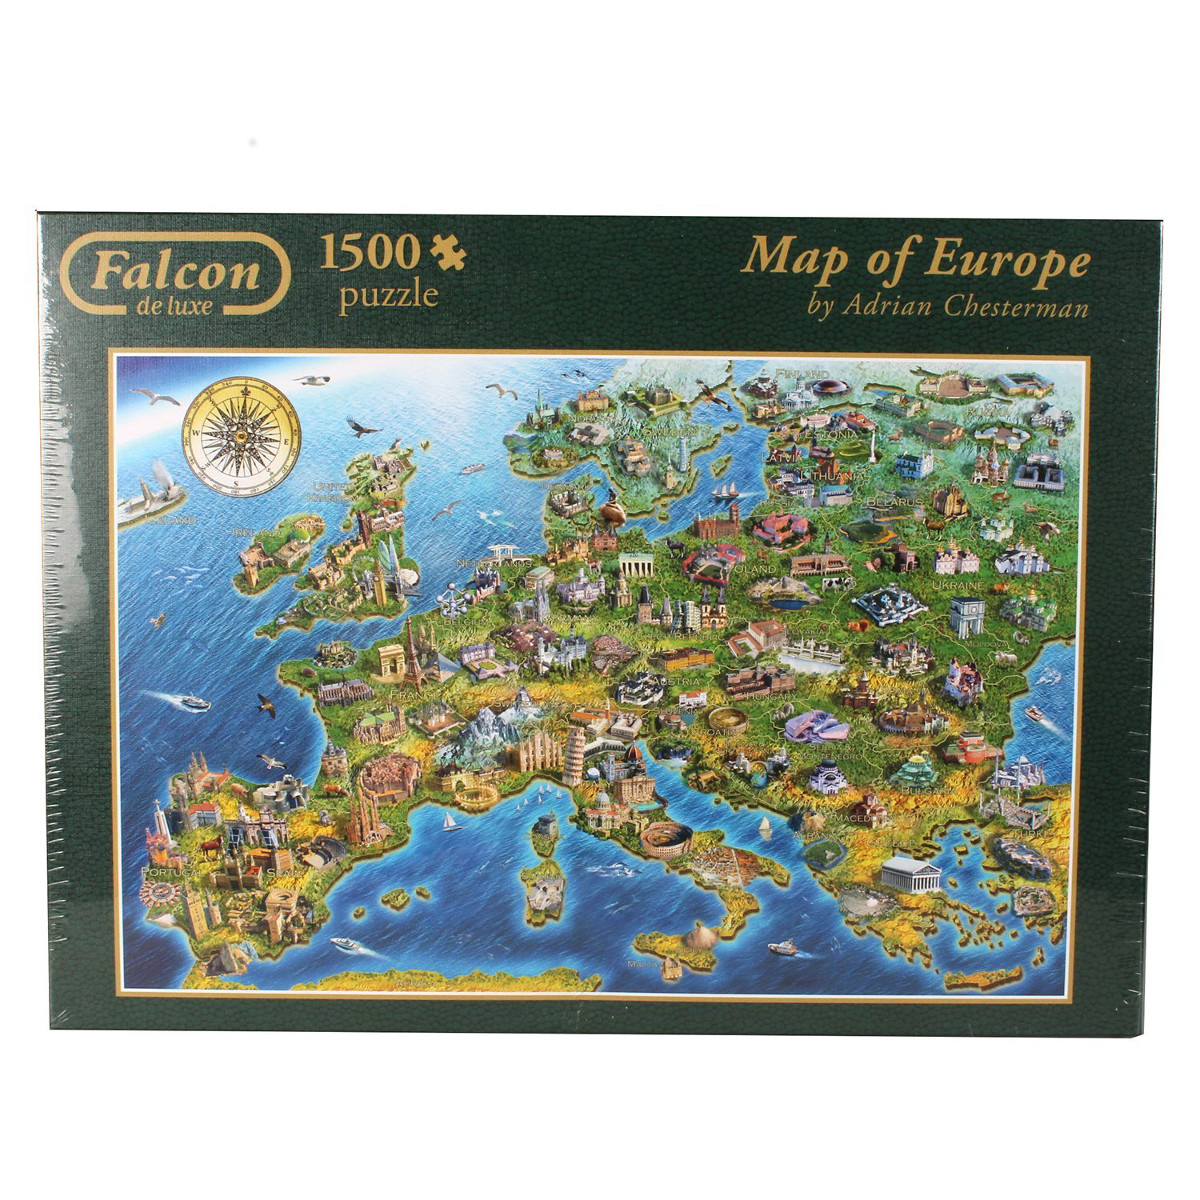 Puzzle Map of Europe, 150 pieces